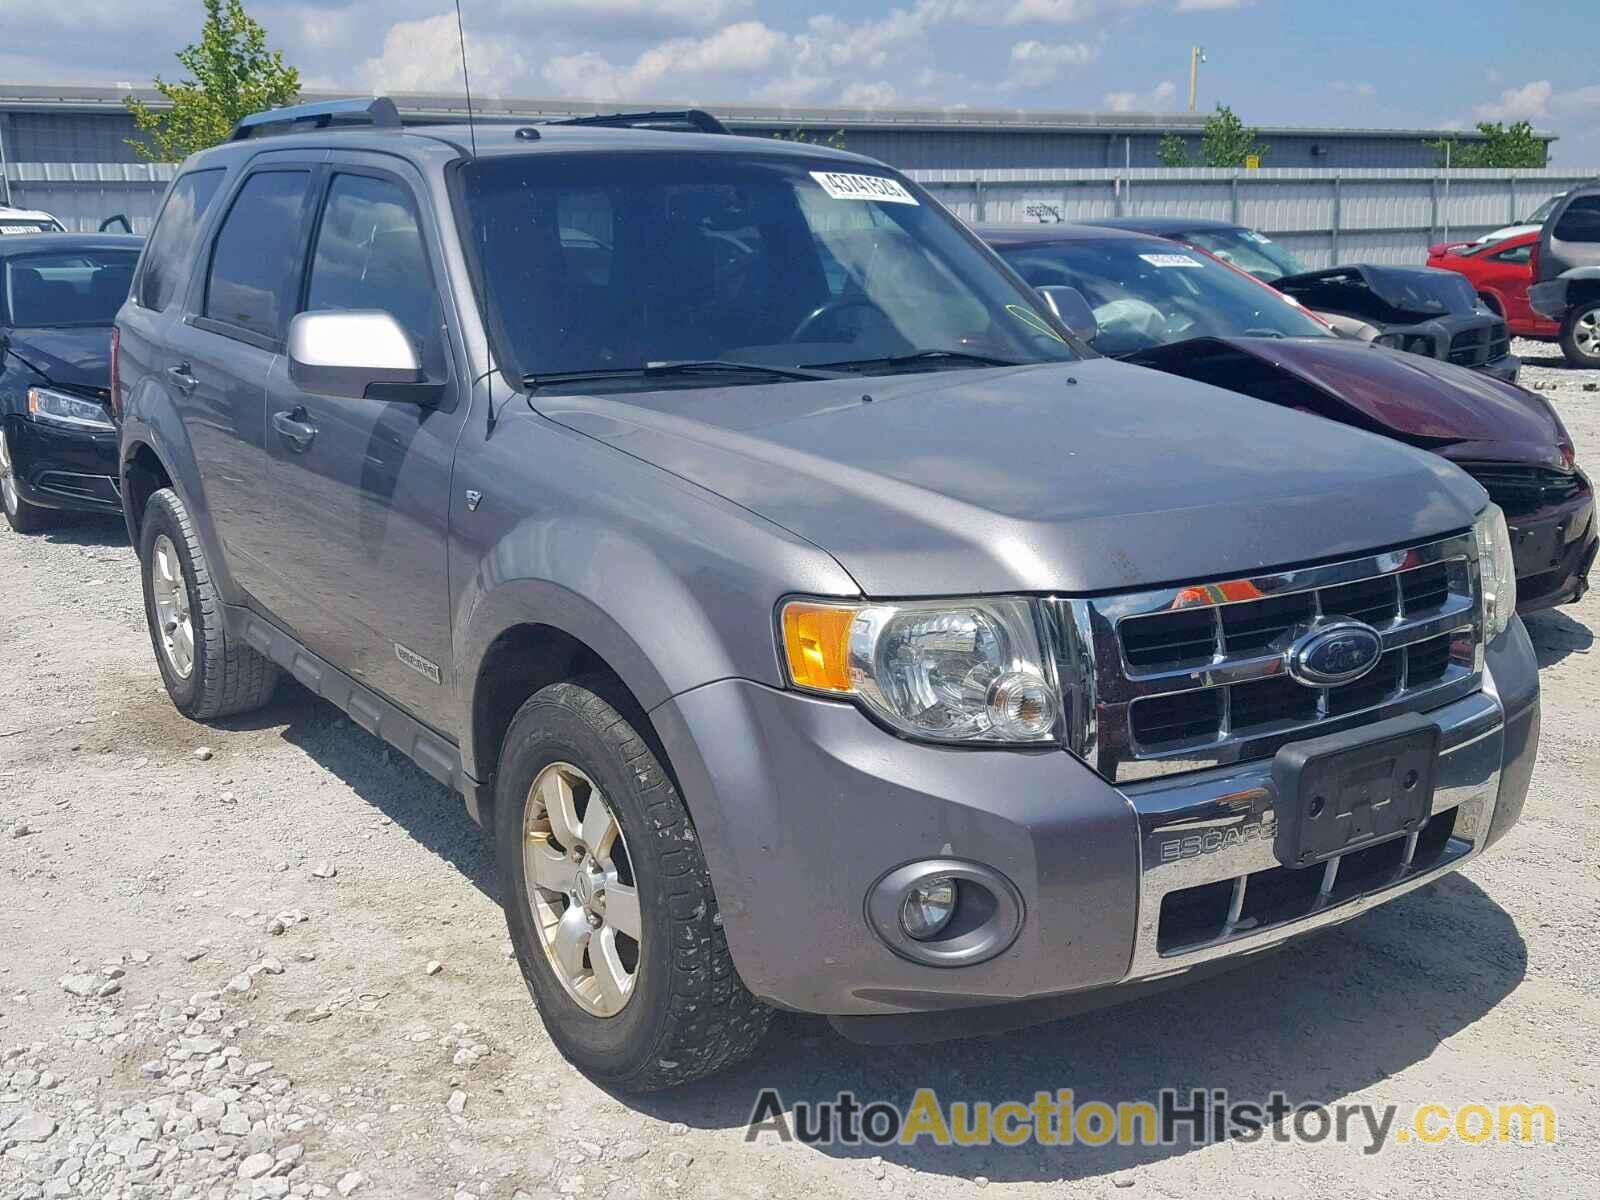 2008 FORD ESCAPE LIMITED, 1FMCU941X8KB43218